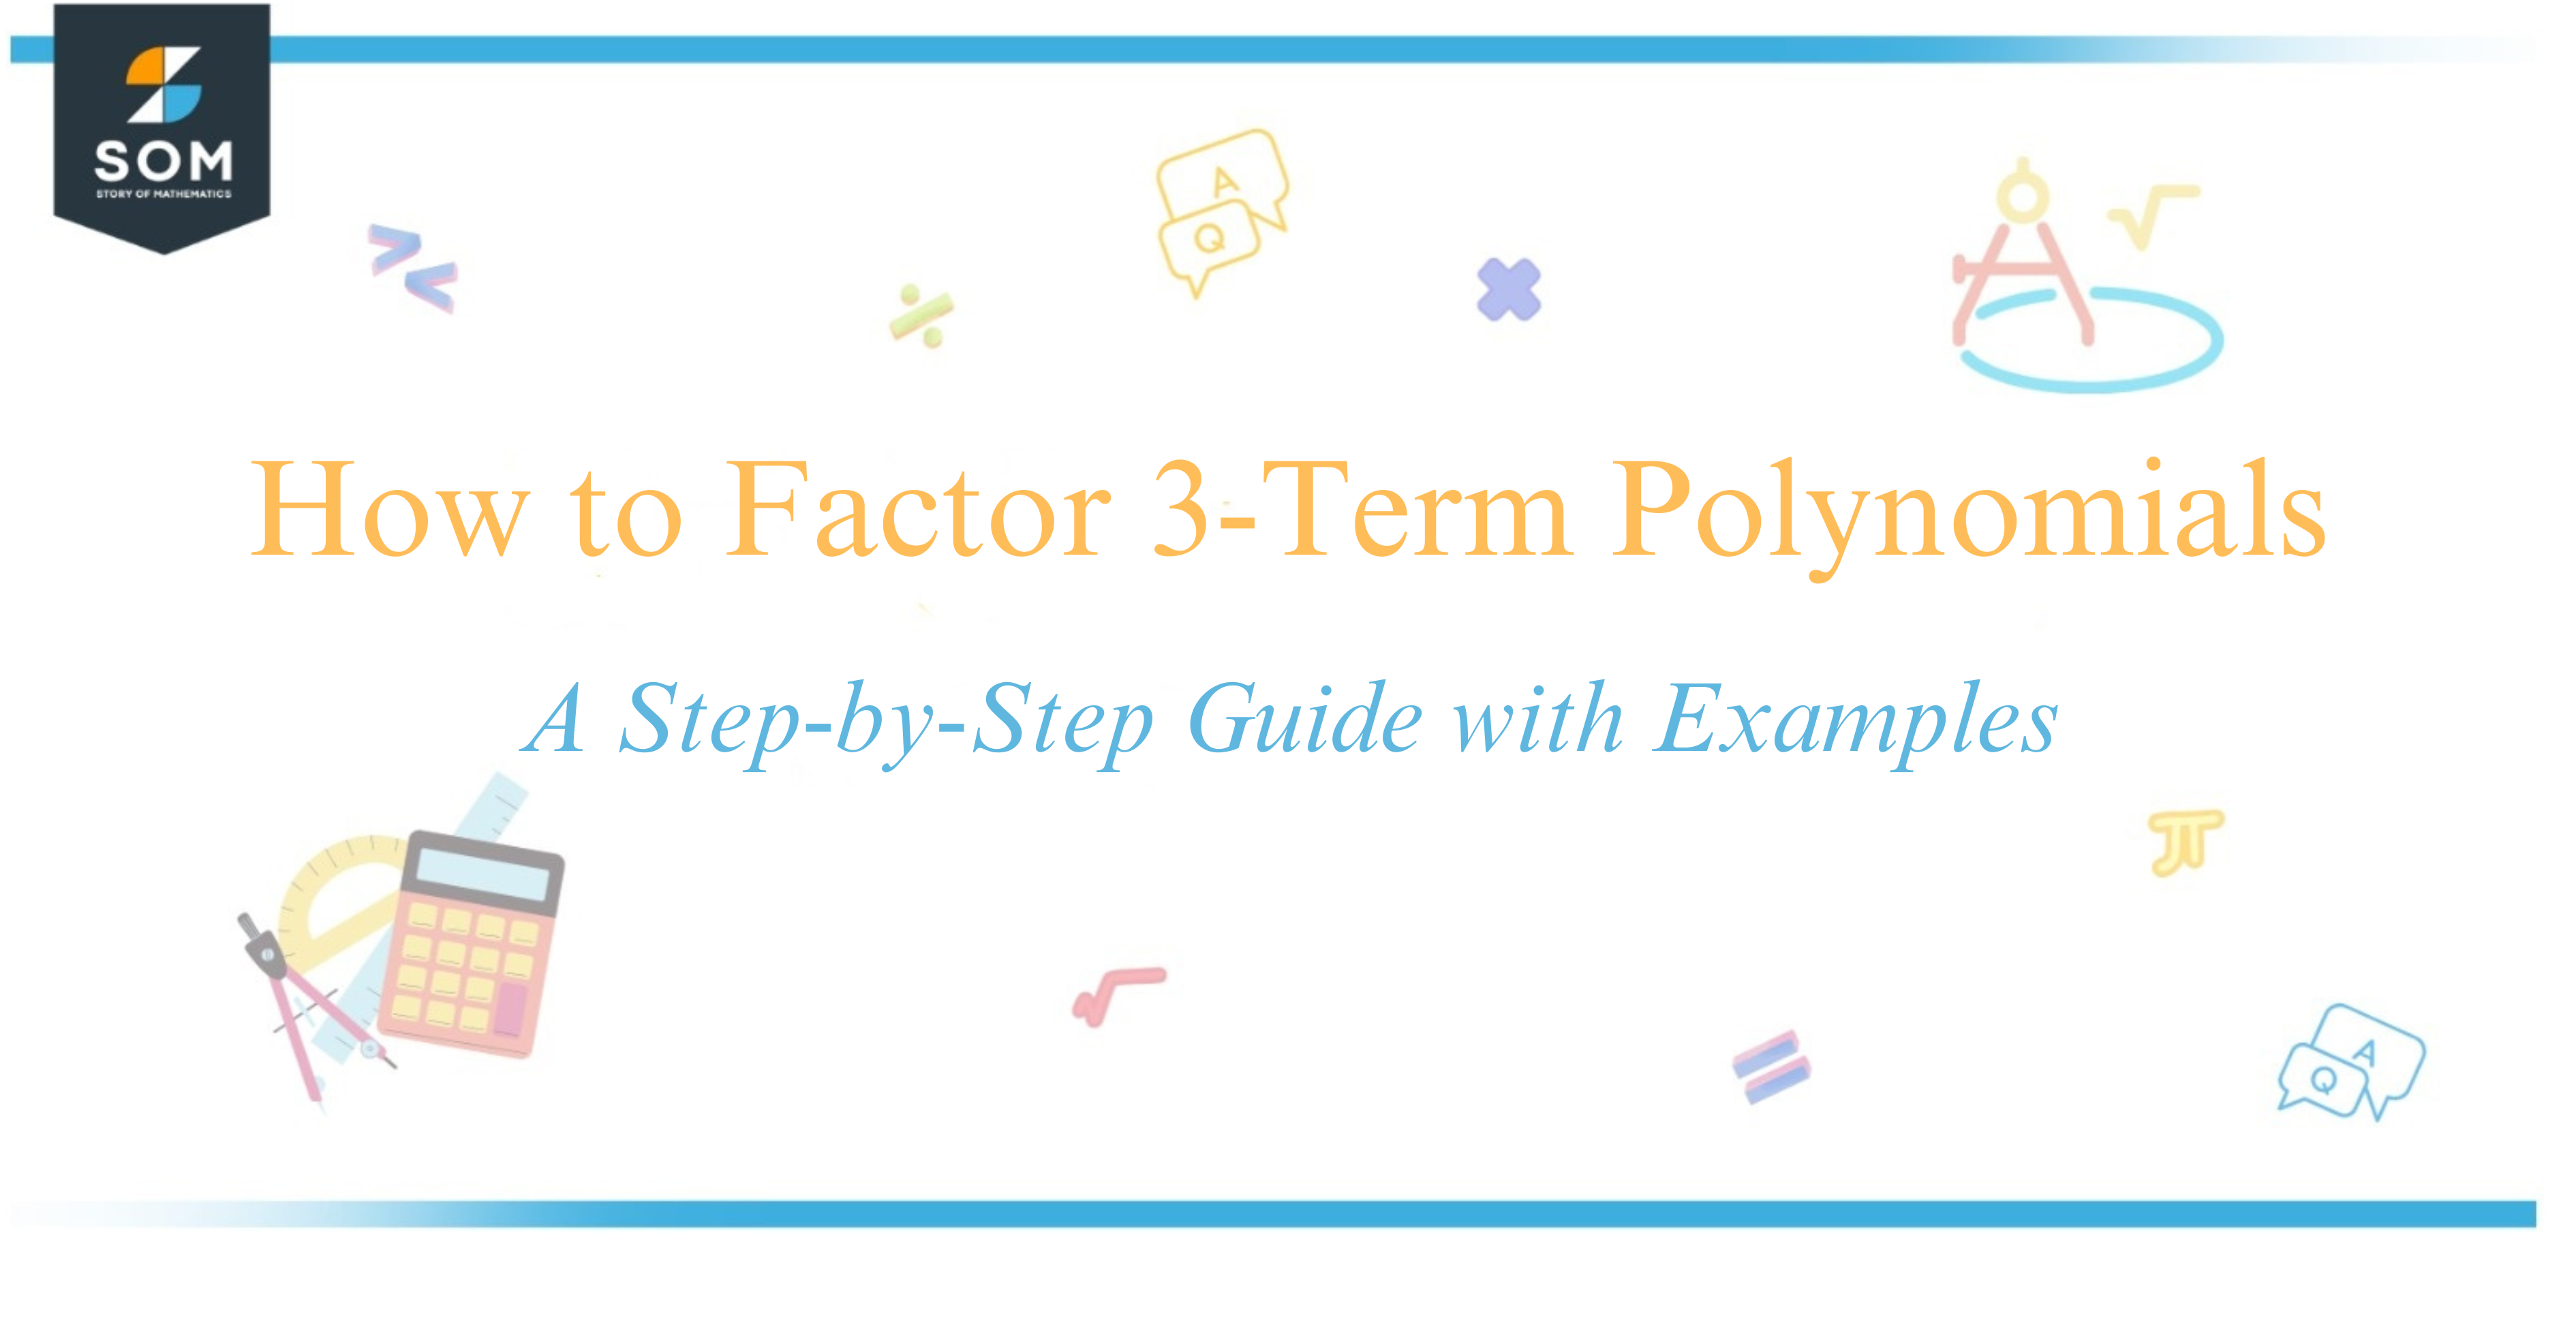 How to Factor 3-Term Polynomials A Step-by-Step Guide with Examples